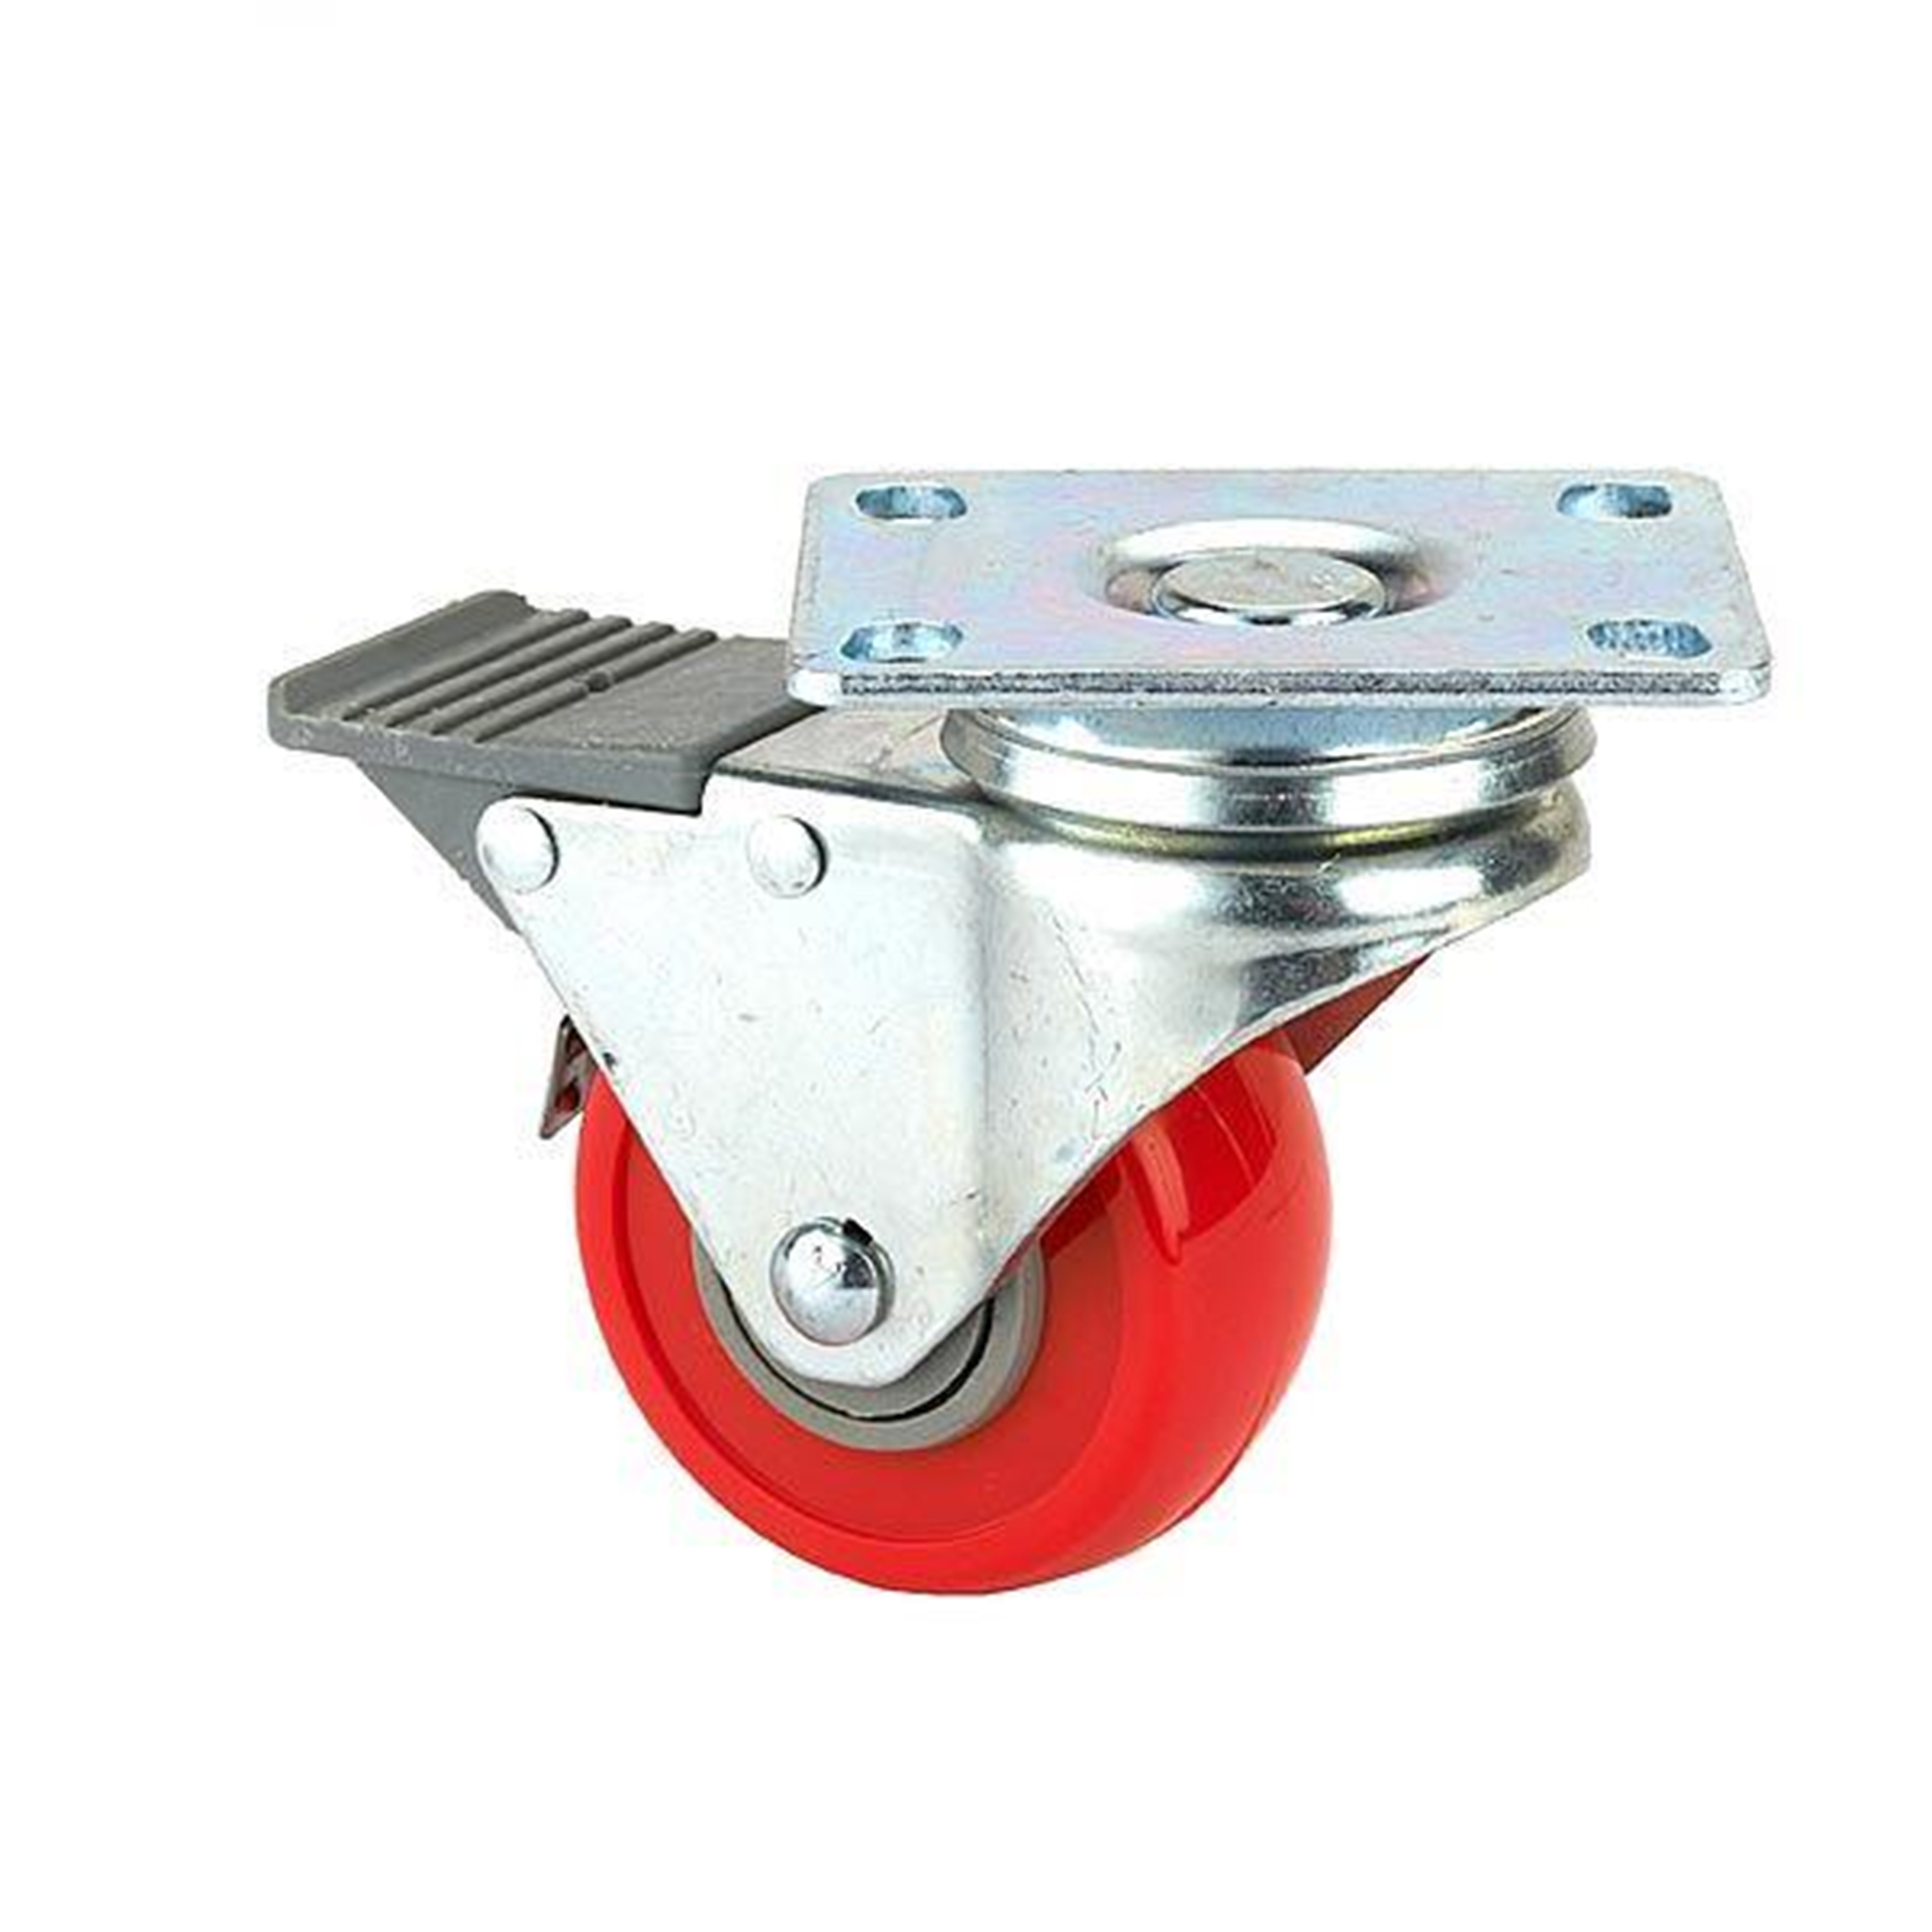 2-1/2" Caster, Double Lock, Swivel Plate With 4-hole Mounting, 3-3/8" Tall